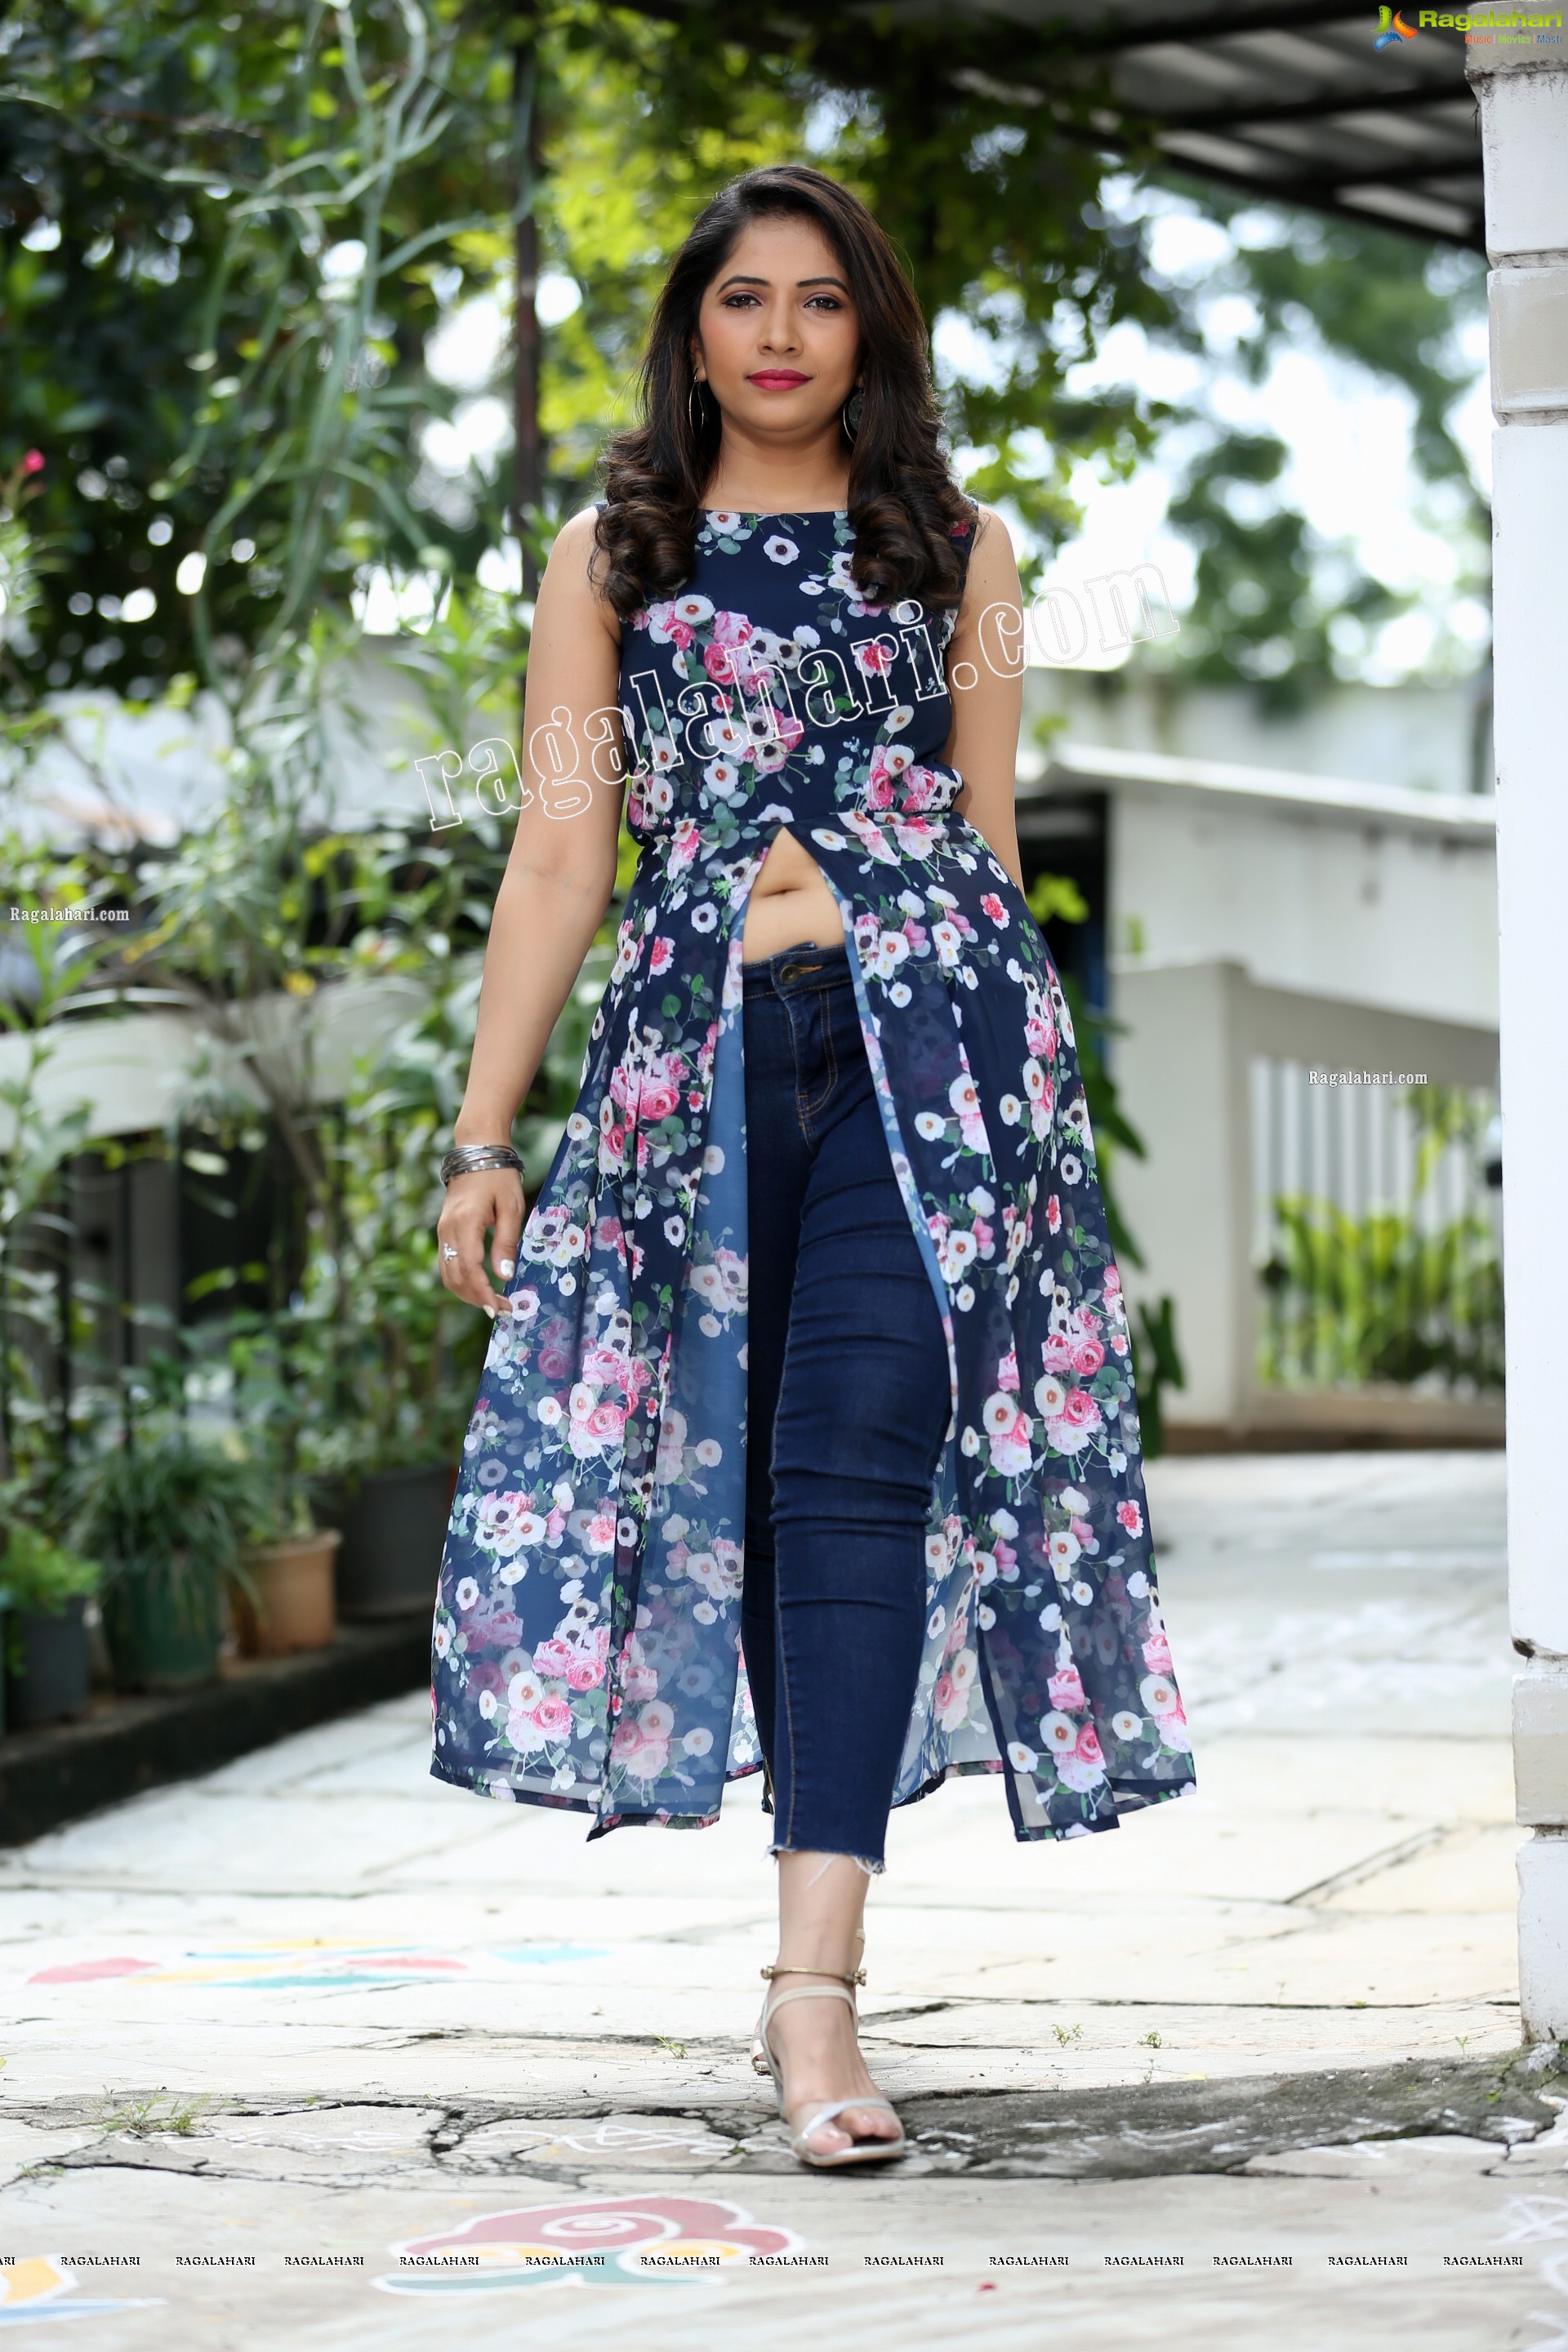 Anchor Indu in Navy Blue Floral Front Slit Top Exclusive Photo Shoot